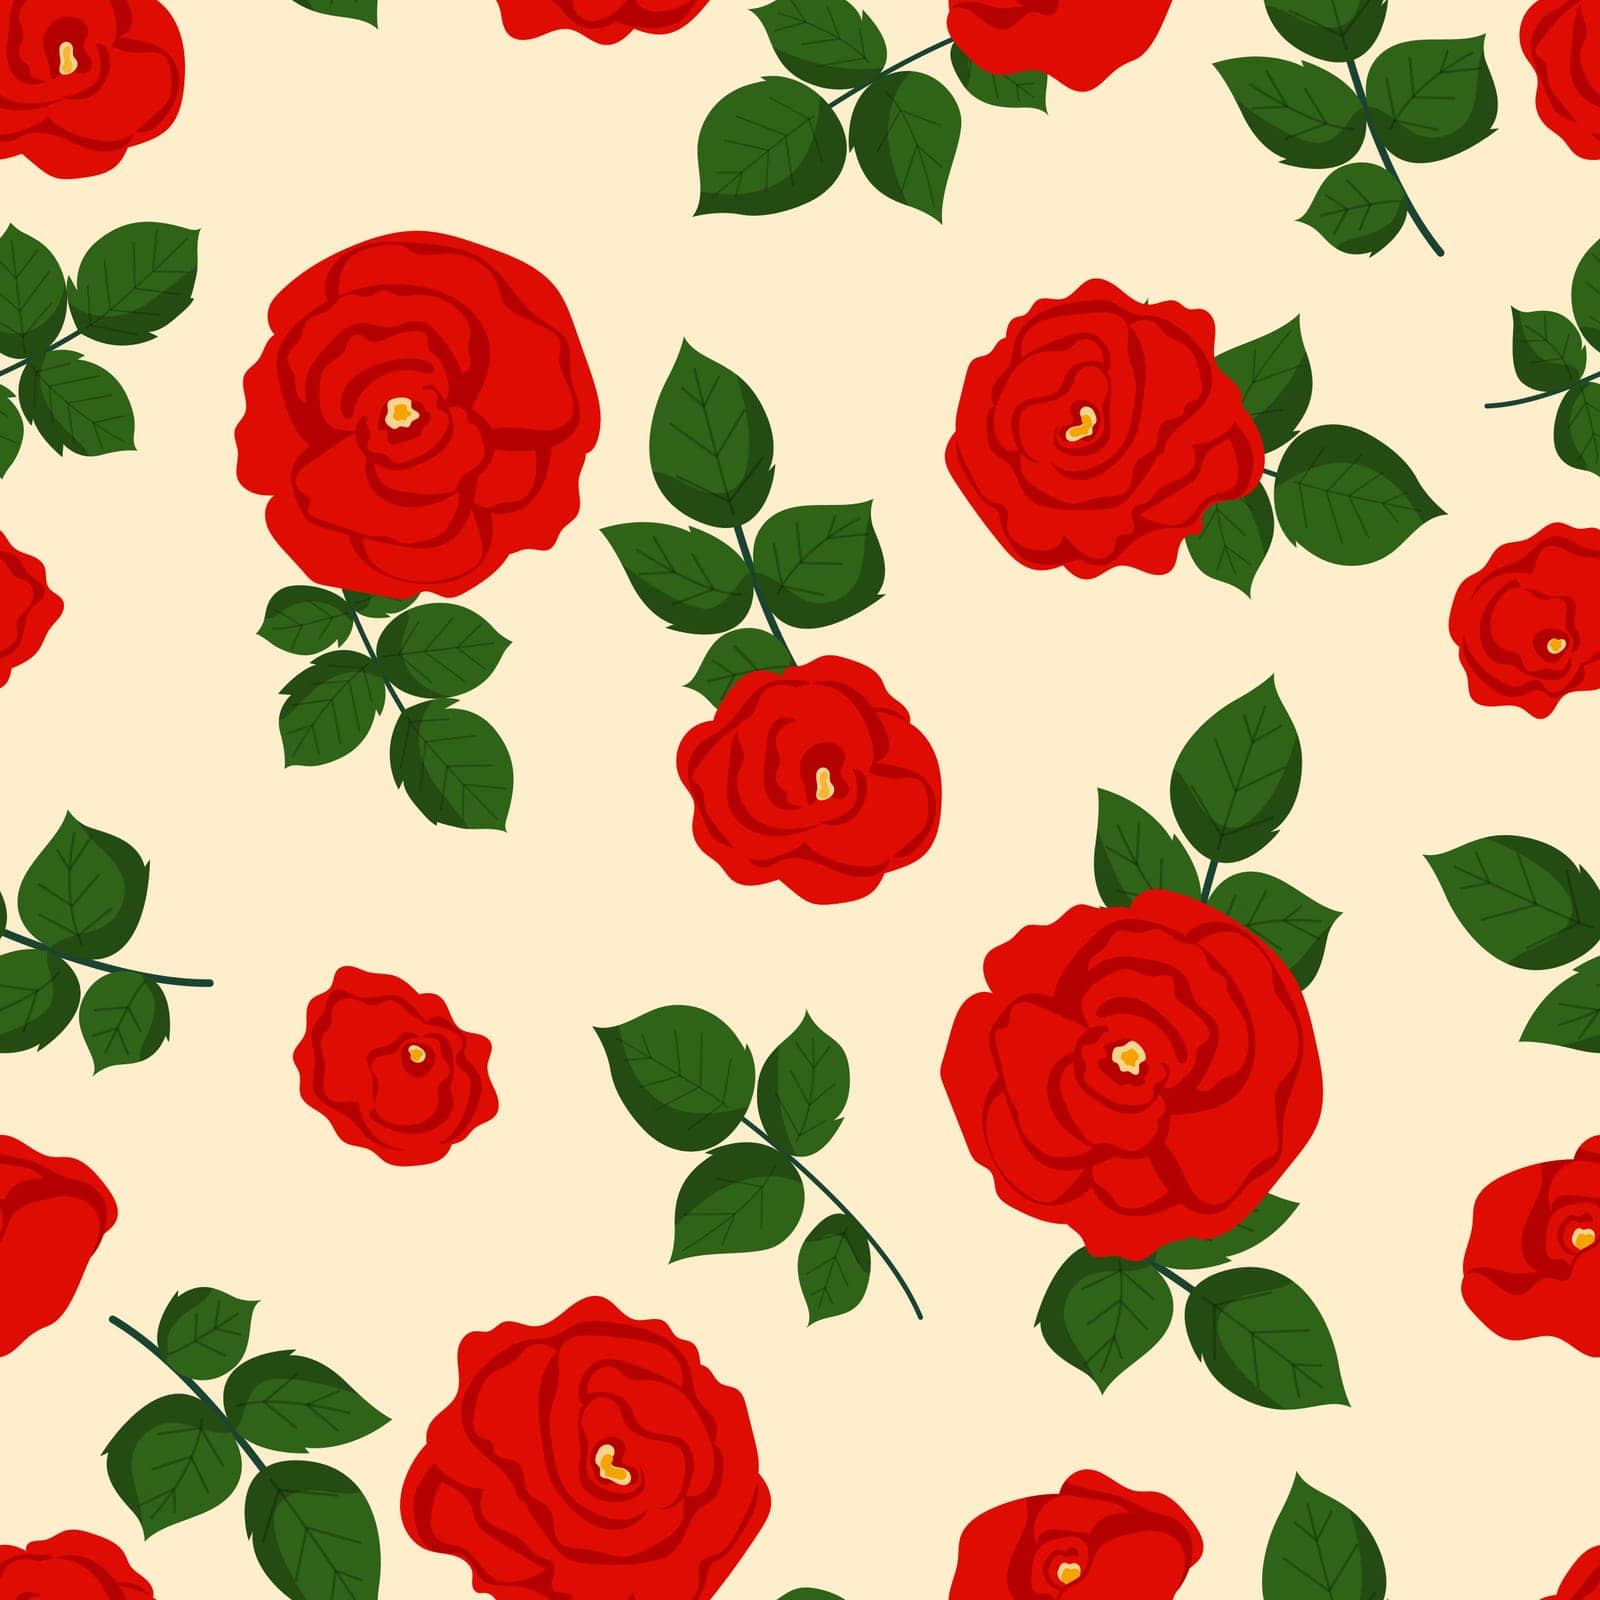 Seamless vintage floral pattern with red roses on pastel background. Backdrop for wallpaper, print, textile, fabric, wrapping. Vector illustration.